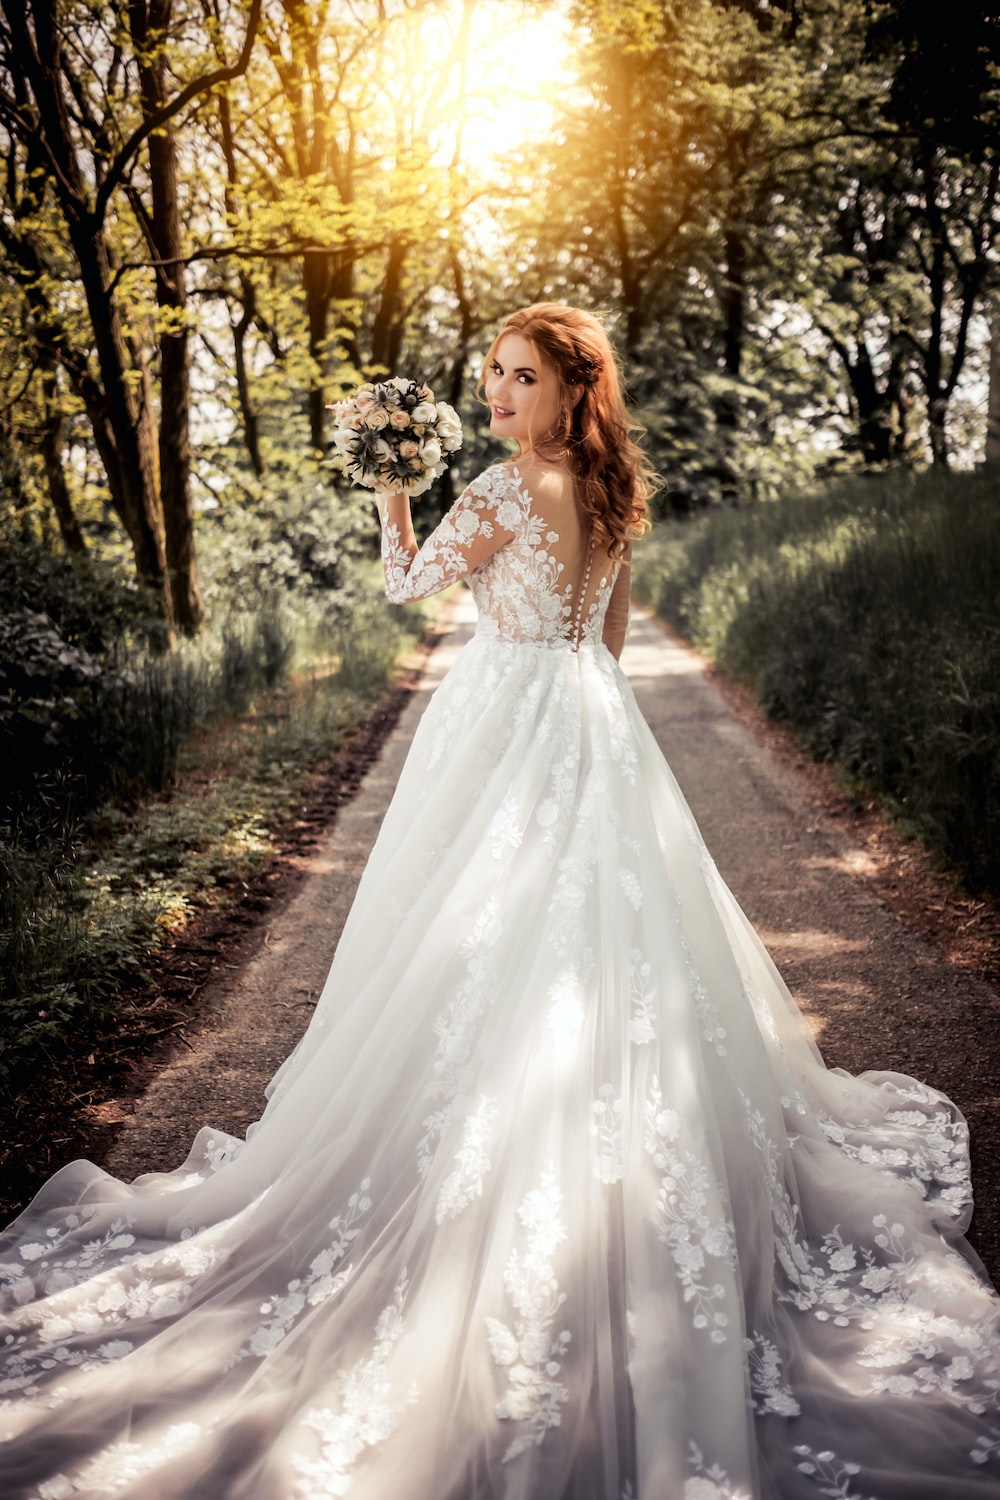 Bride pictures hd download free images stock photos on